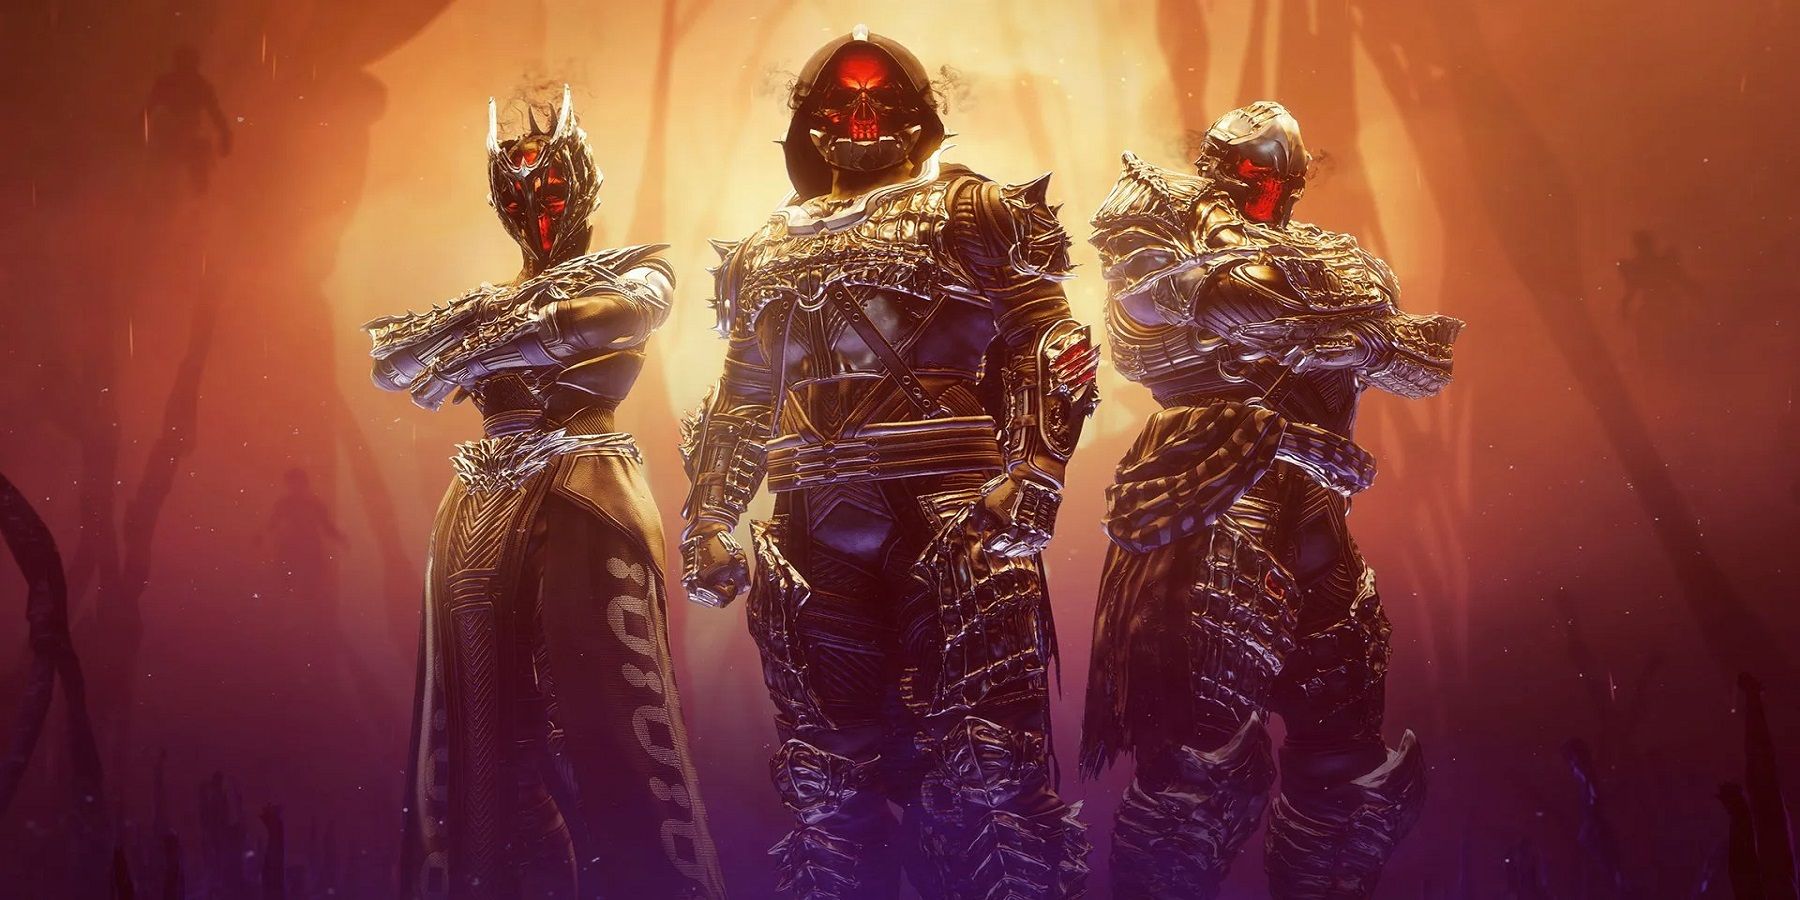 A new leak showcases new Titan, Warlock, and Hunter armor in Destiny 2 as part of a Fortnite crossover.